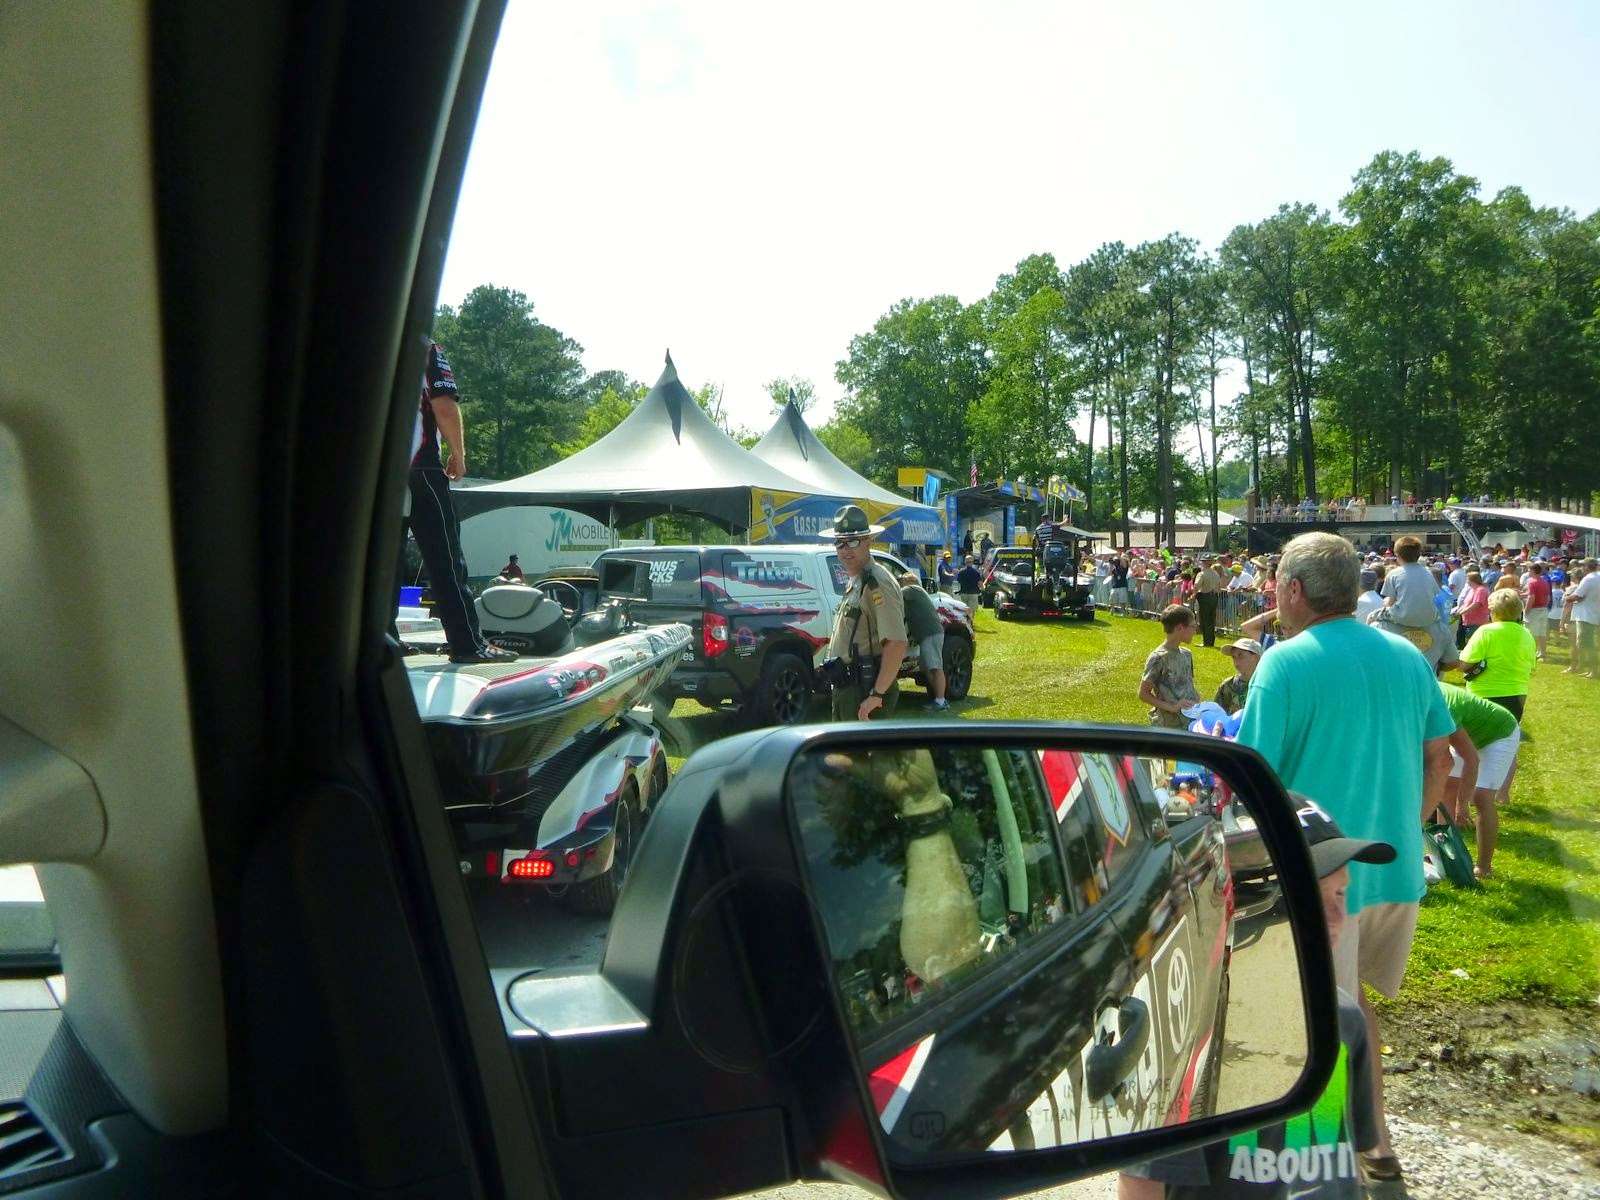 Check this out, you ever wonder what it is like to drive up to the stage on Championship Sundayâ¦well, here you go...
